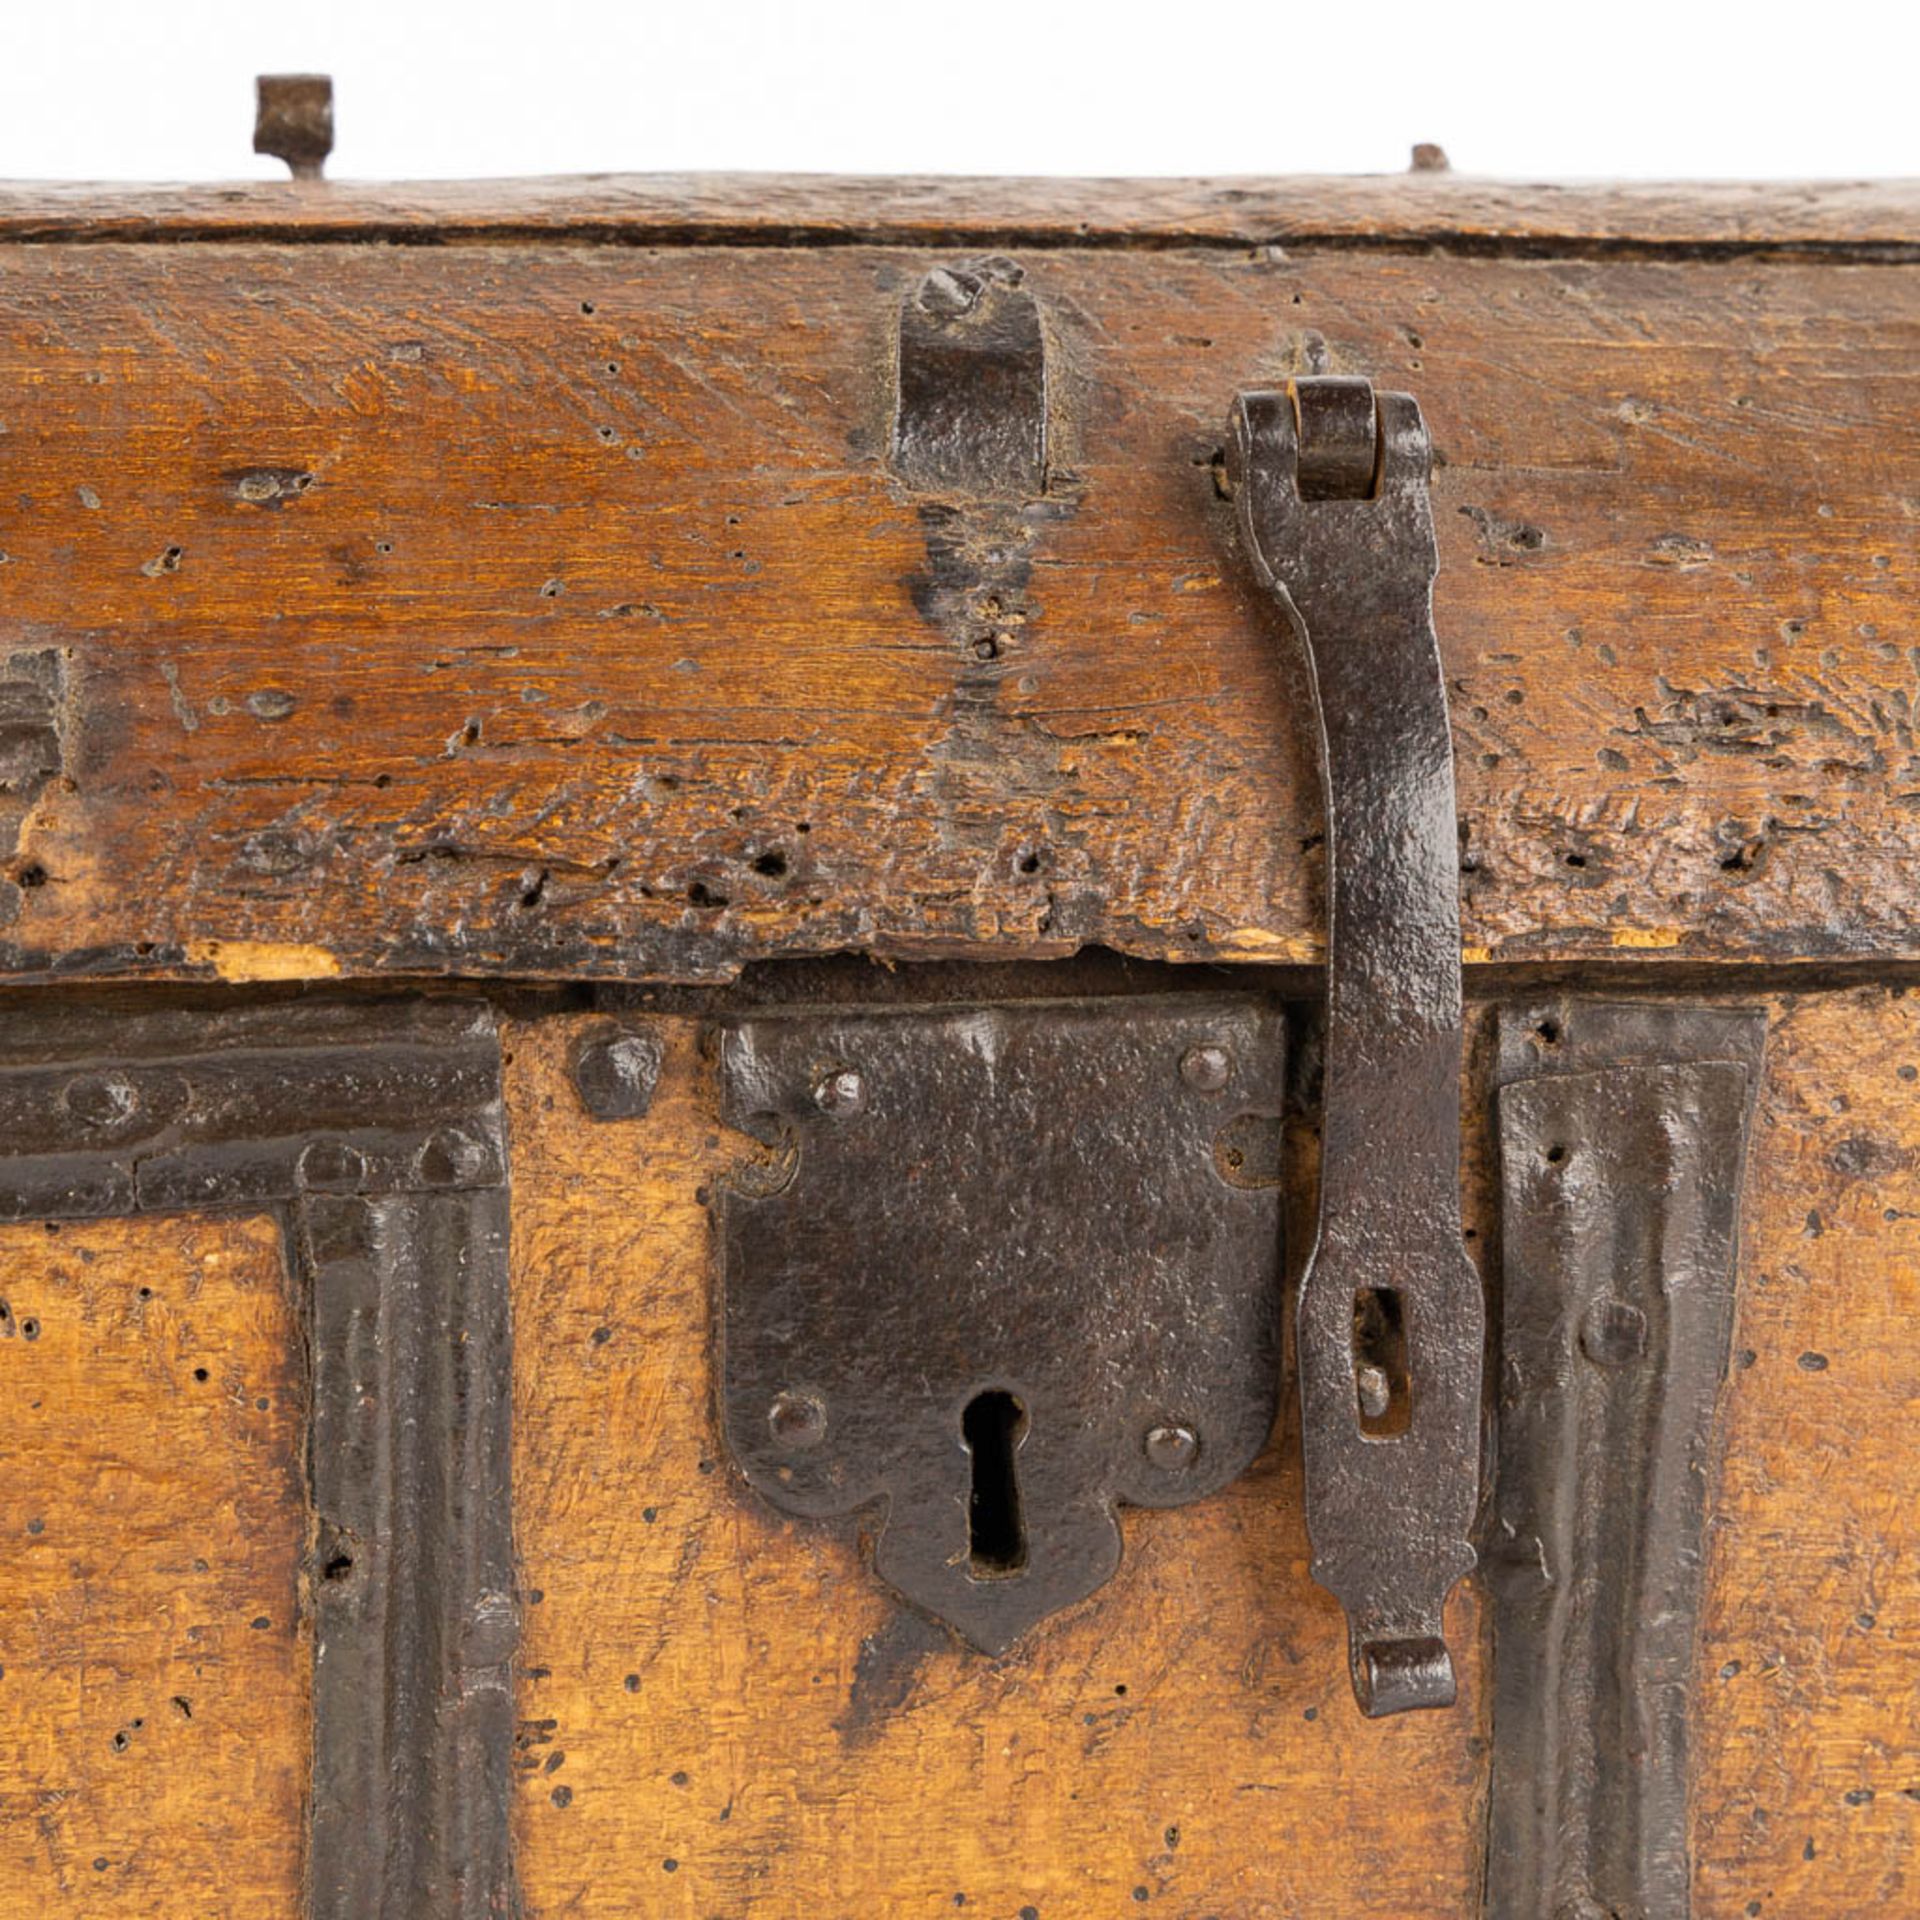 An antique money box or storage chest, wood and wrought iron, 16th/17th C. (L:20 x W:36 x H:22 cm) - Image 13 of 14